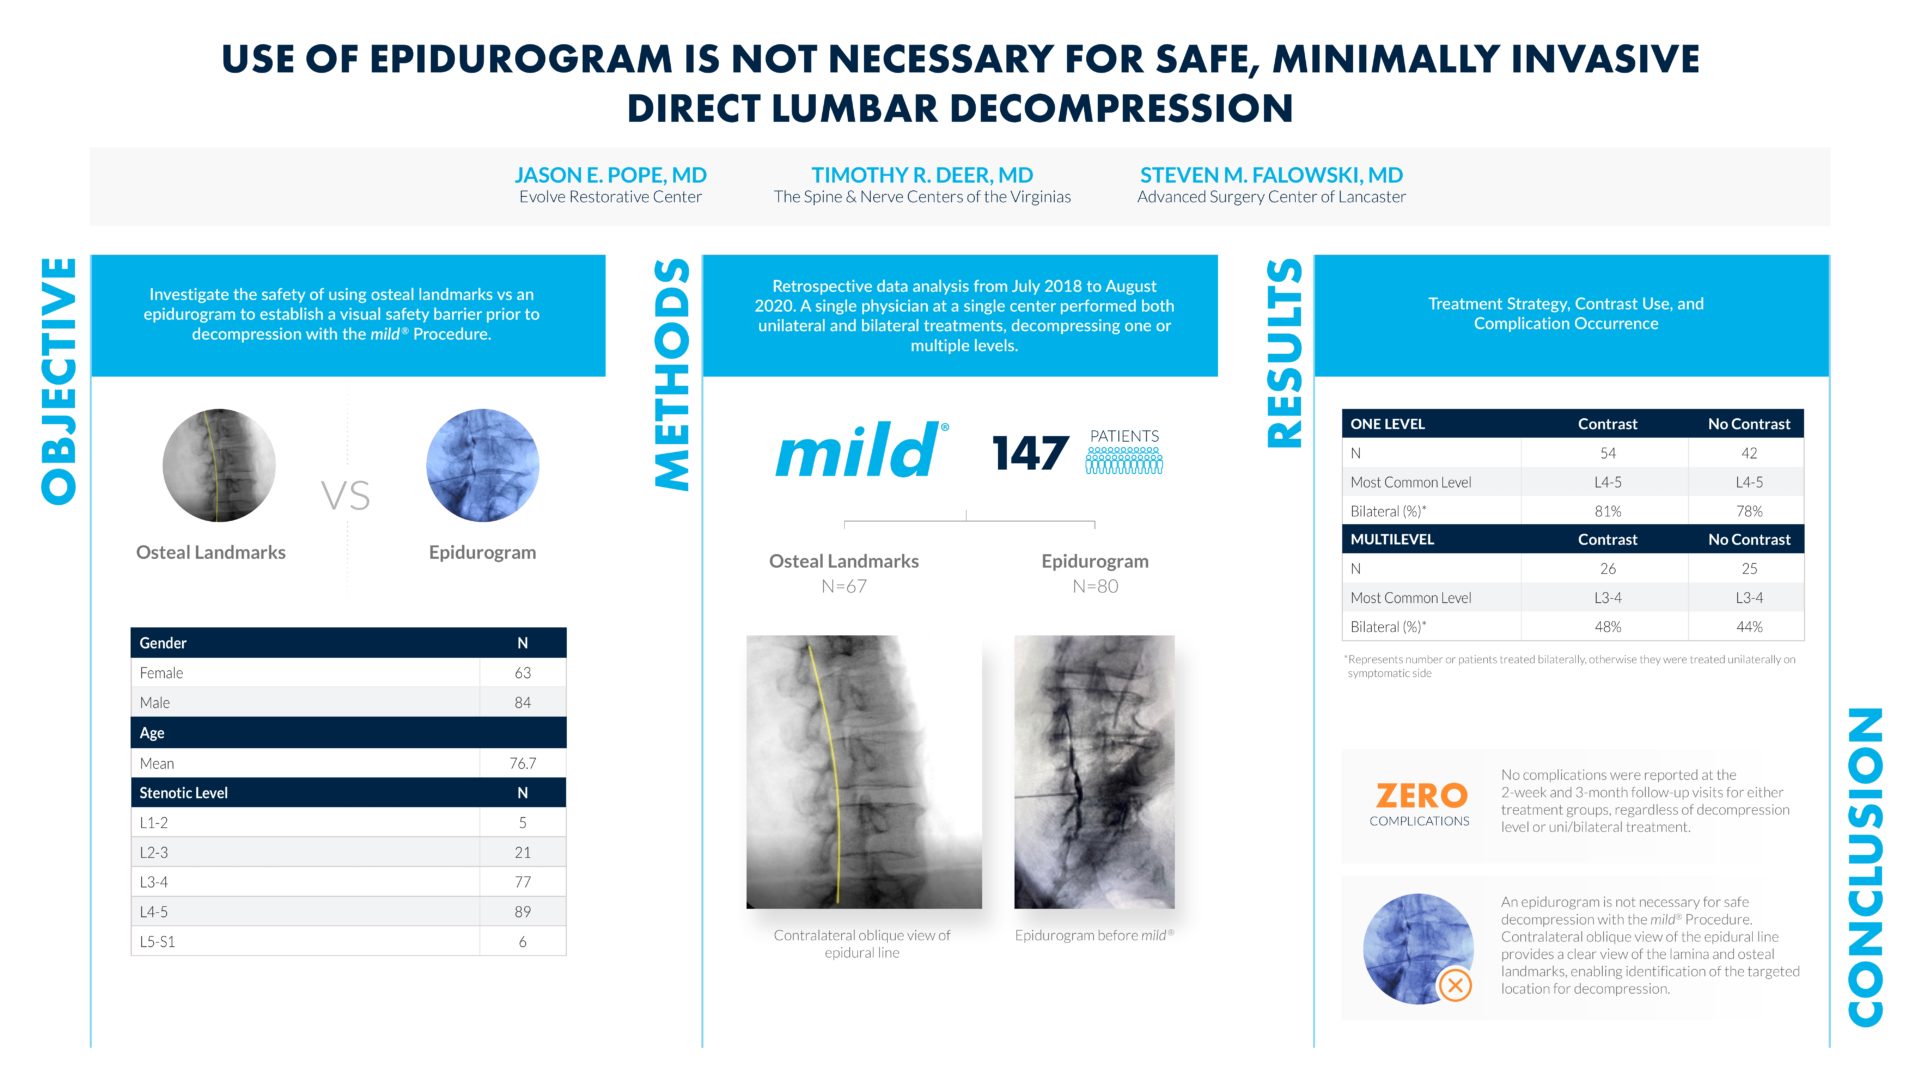 Infographic showing the objective, methods and results of how the Use of Epidurogram is Not Necessary for Safe, Minimally Invasive Direct Lumbar Decompression